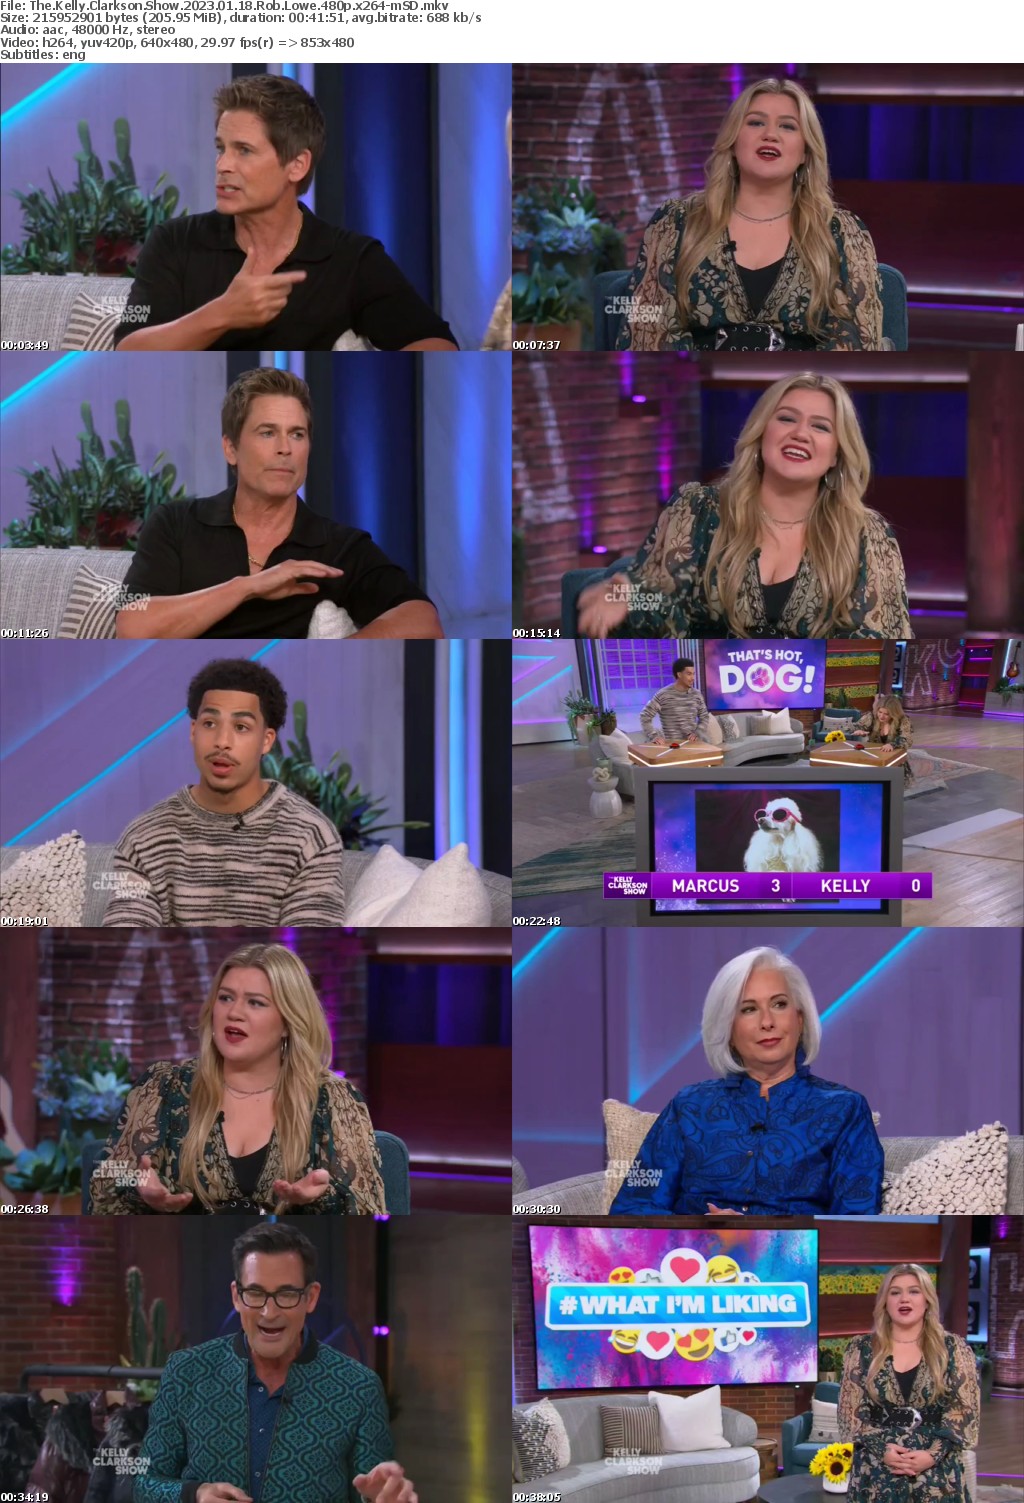 The Kelly Clarkson Show 2023 01 18 Rob Lowe 480p x264-mSD